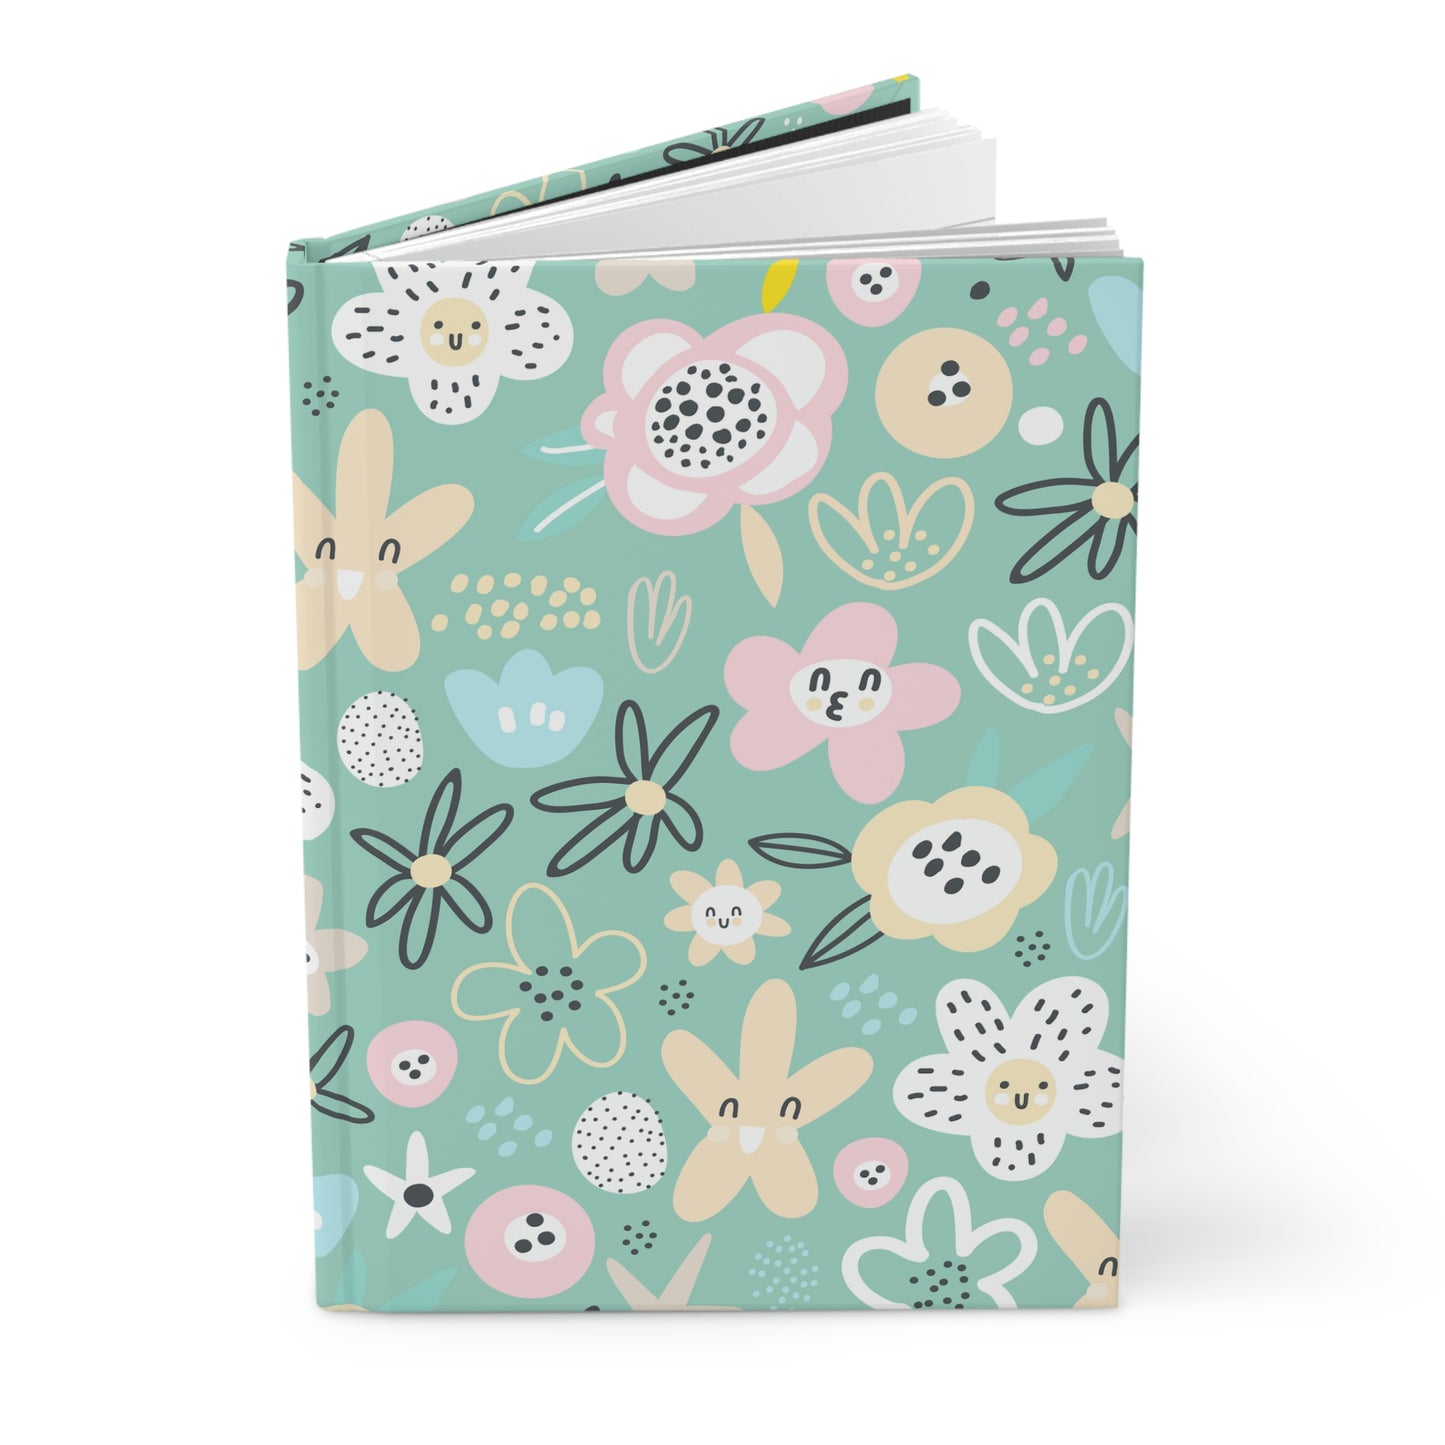 Abstract Flowers Hardcover Journal Matte